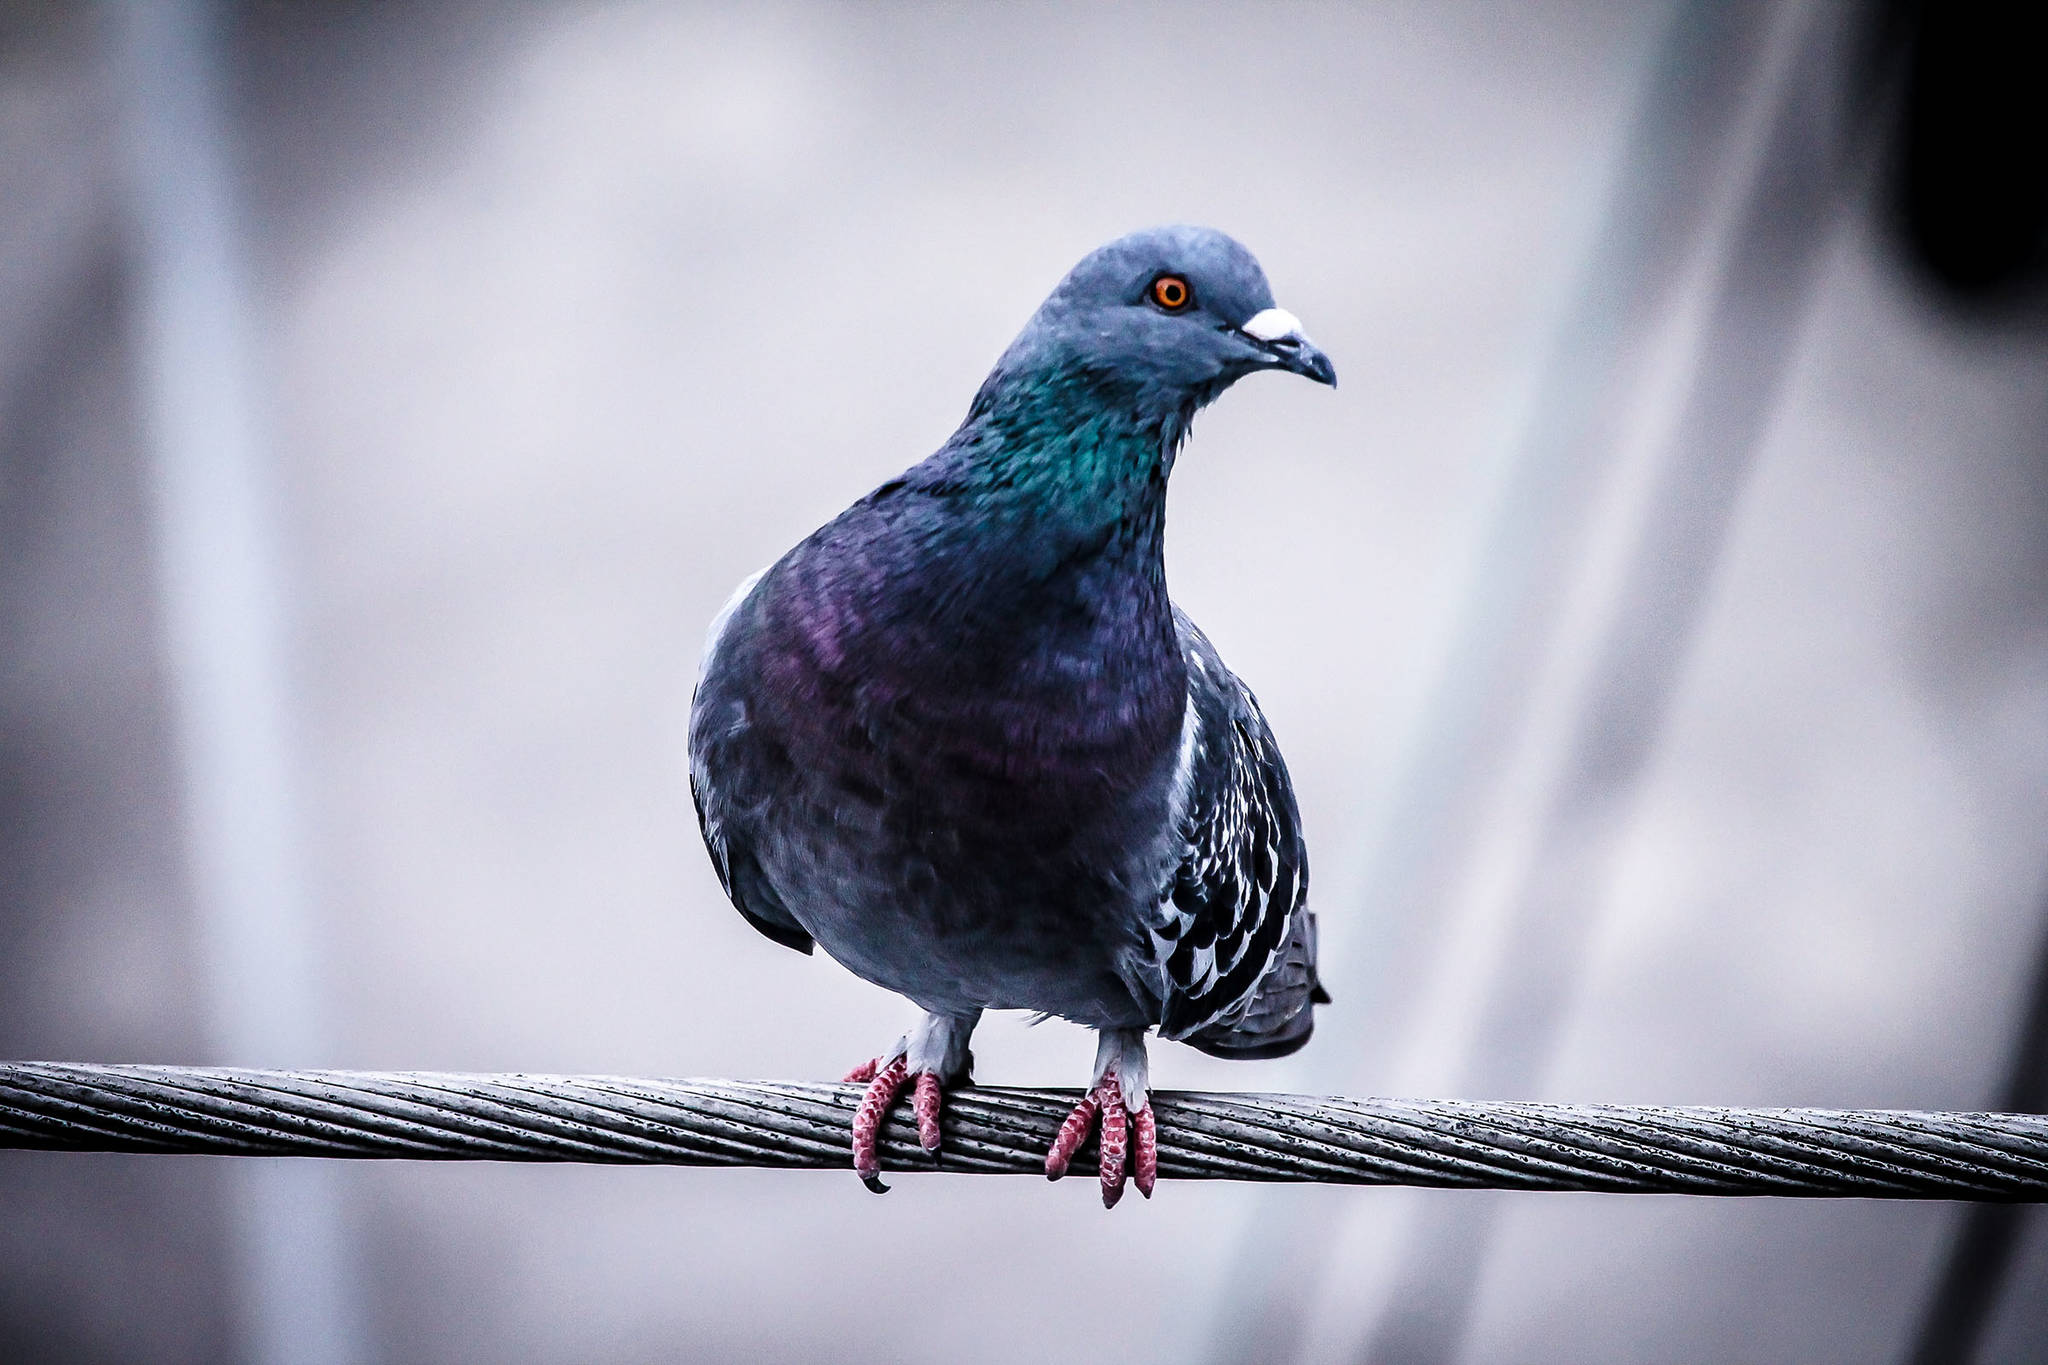 Homing pigeons use magnetic sense to locate their home roost.